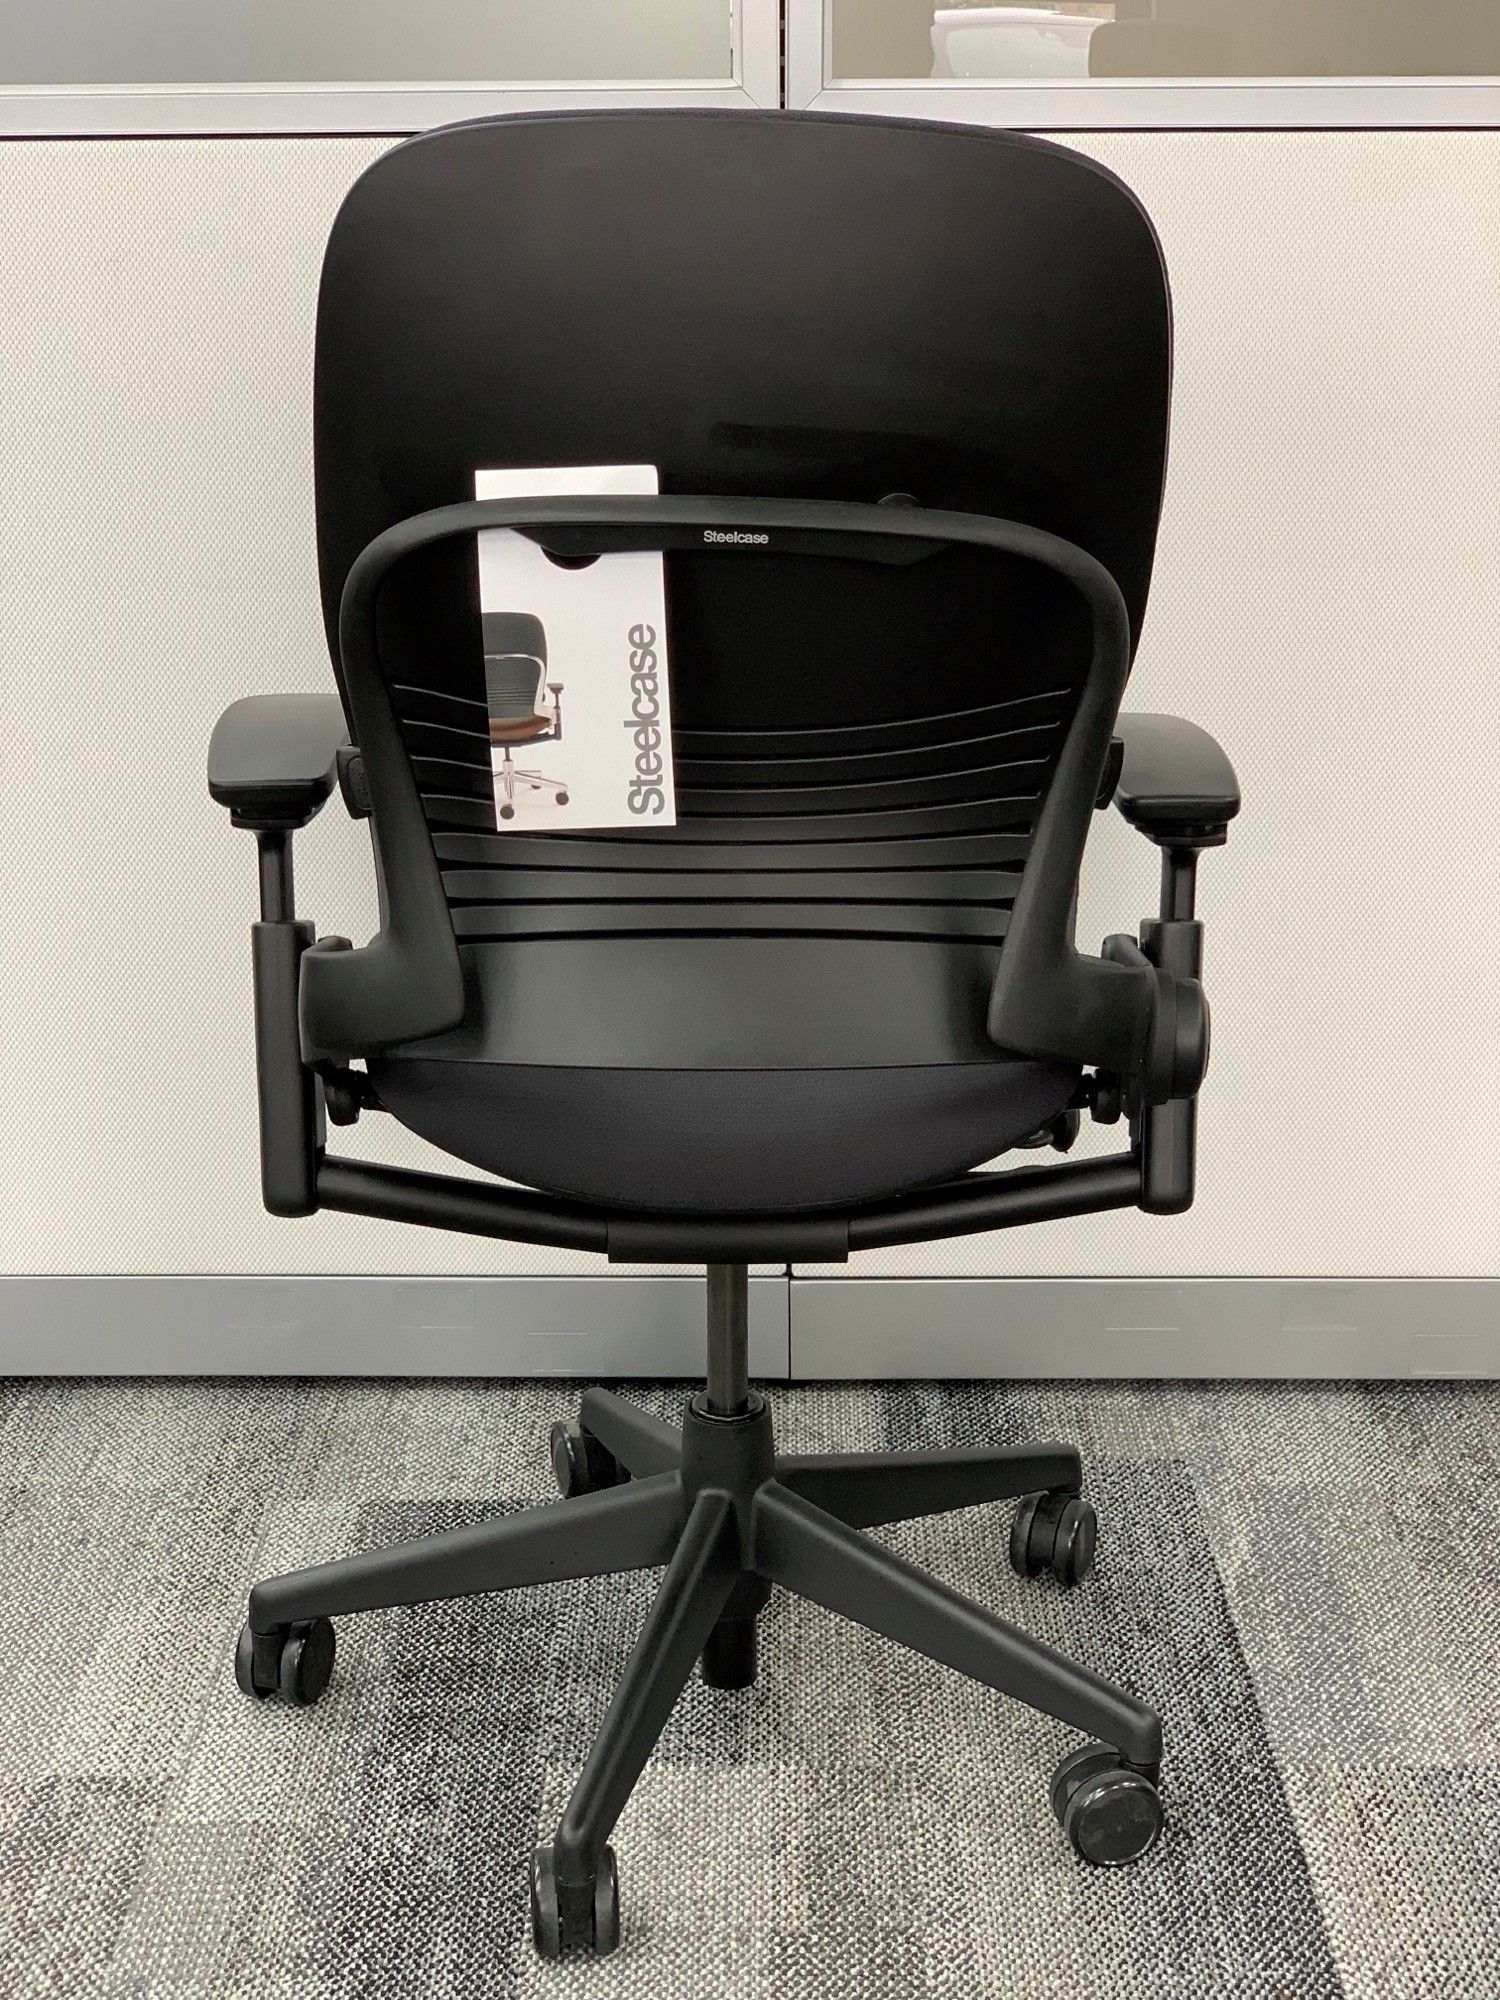 Minimalist Steelcase Chairs Price Canada with Simple Decor